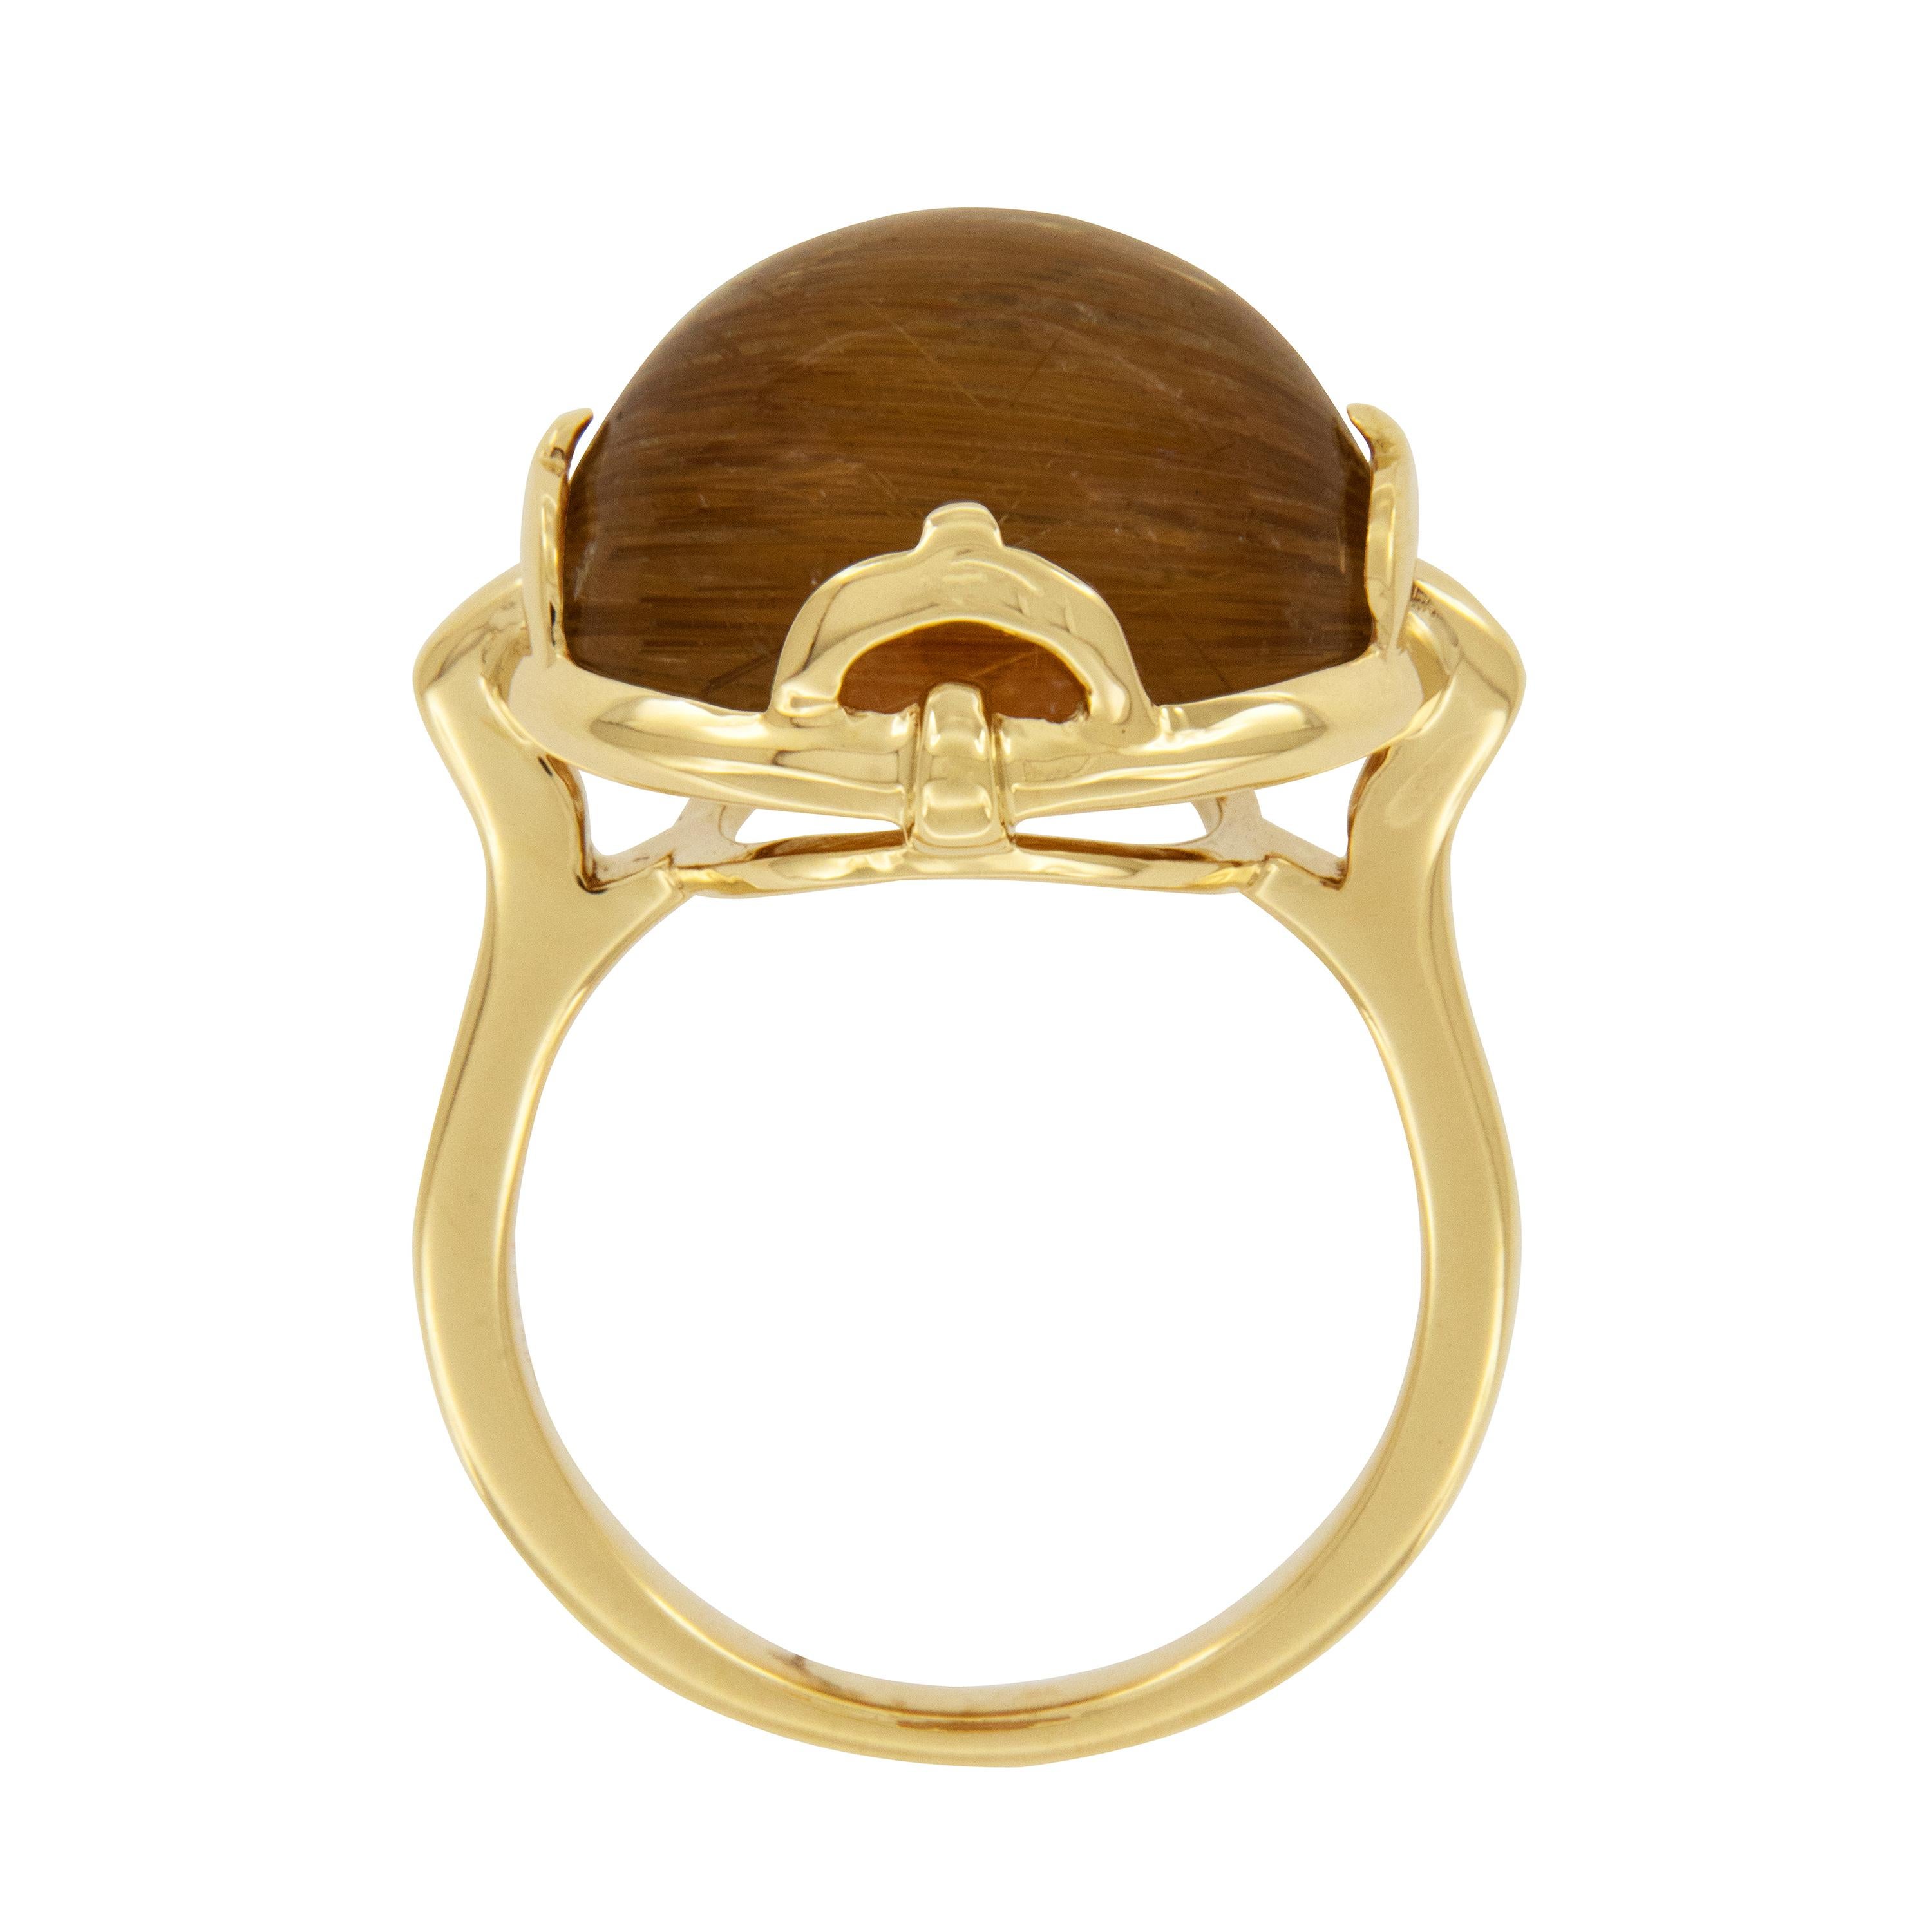 Be the Rock Star that you are wearing this ring! Like the music, the Rock ‘n Roll collection is electric in color with silhouettes that may bring out the rock star in you! This ring centers around a glimmering 17.67 carat cabochon golden rutilated